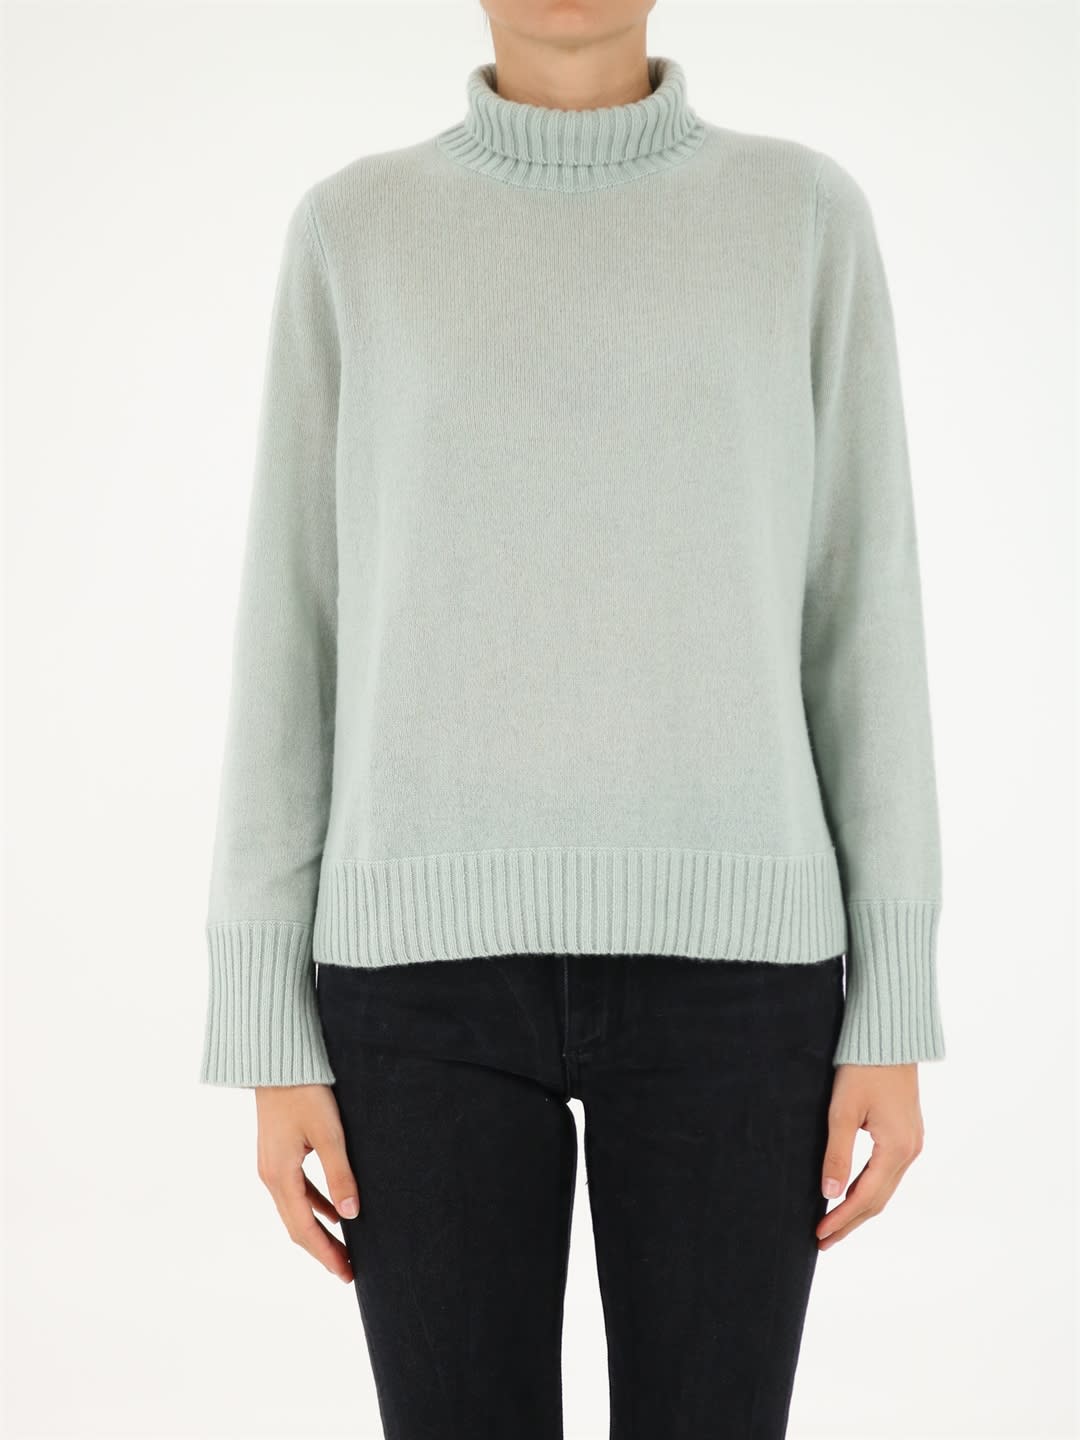 Allude Pastel Green Turtleneck Sweater